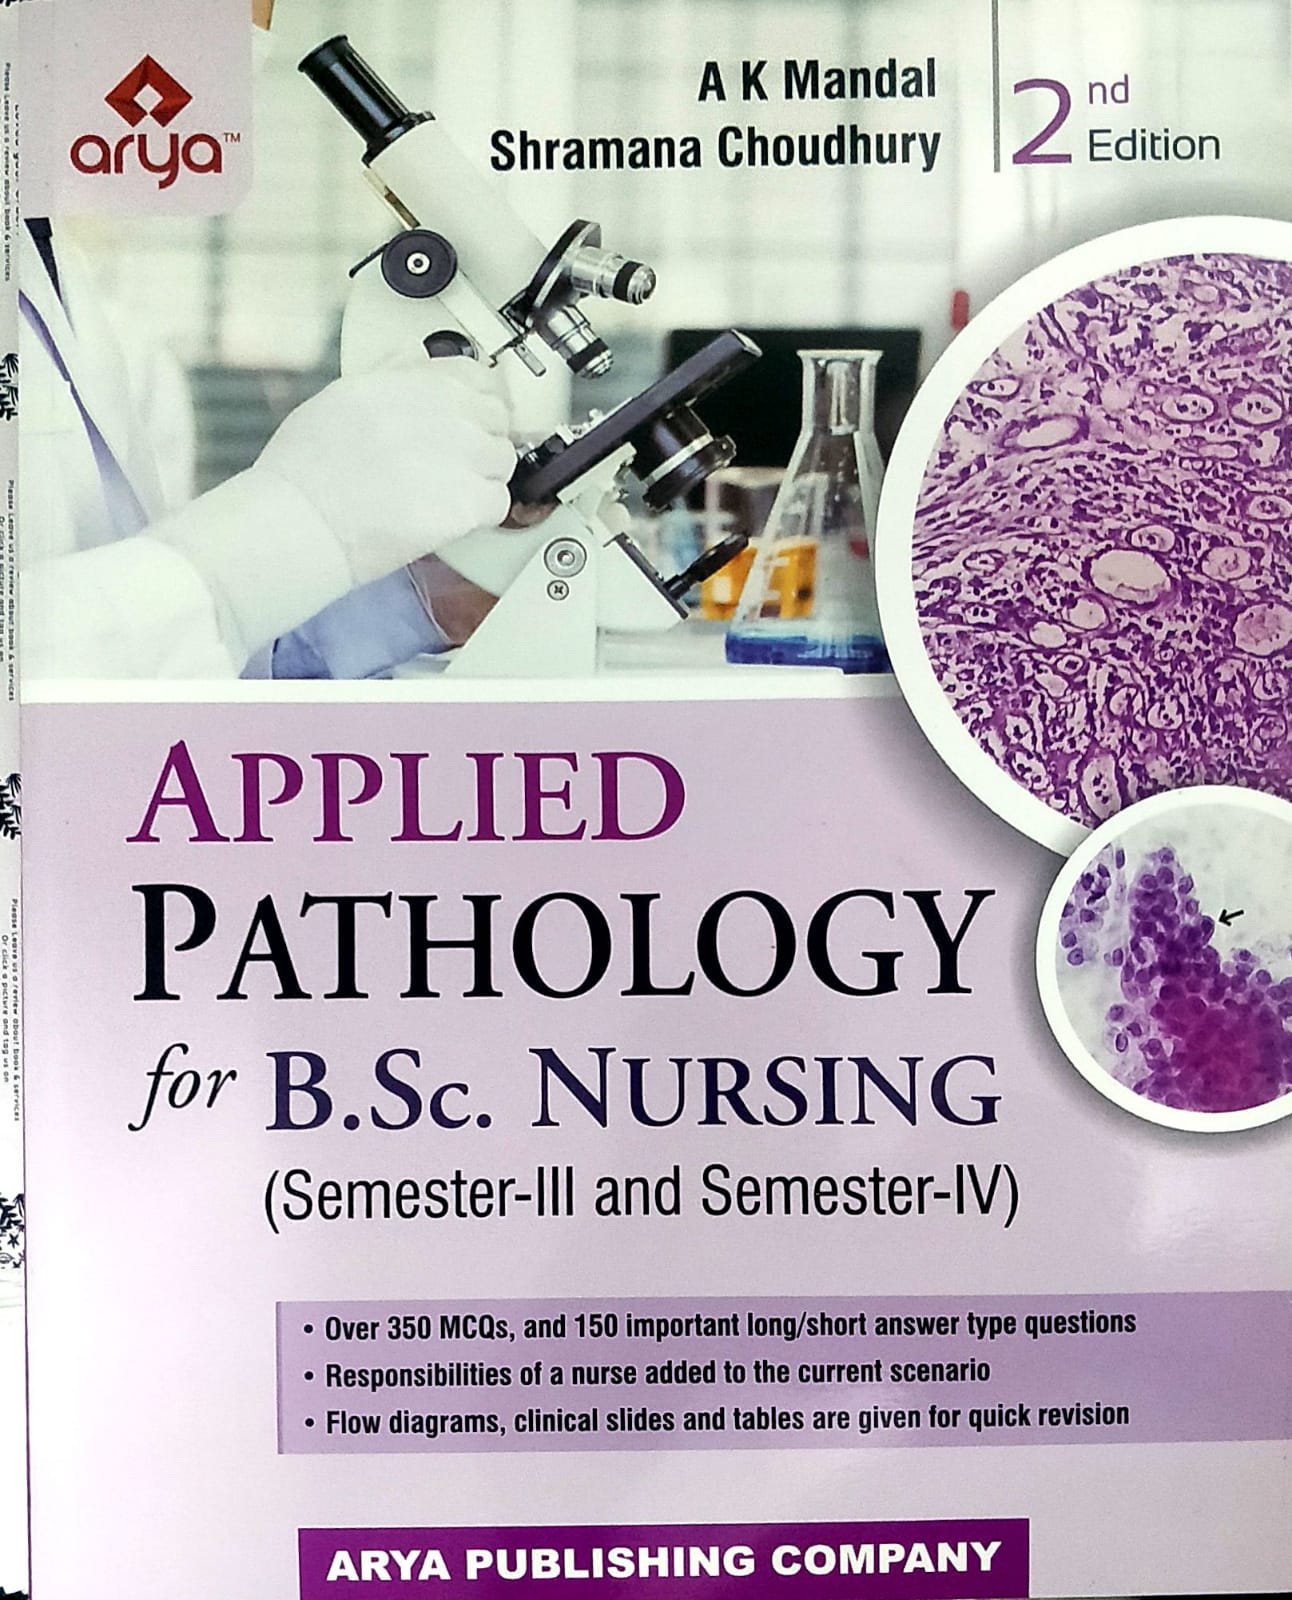 Applied Pathology For B.Sc. Nursing (Semester-III and Semester-IV) 2nd Edition